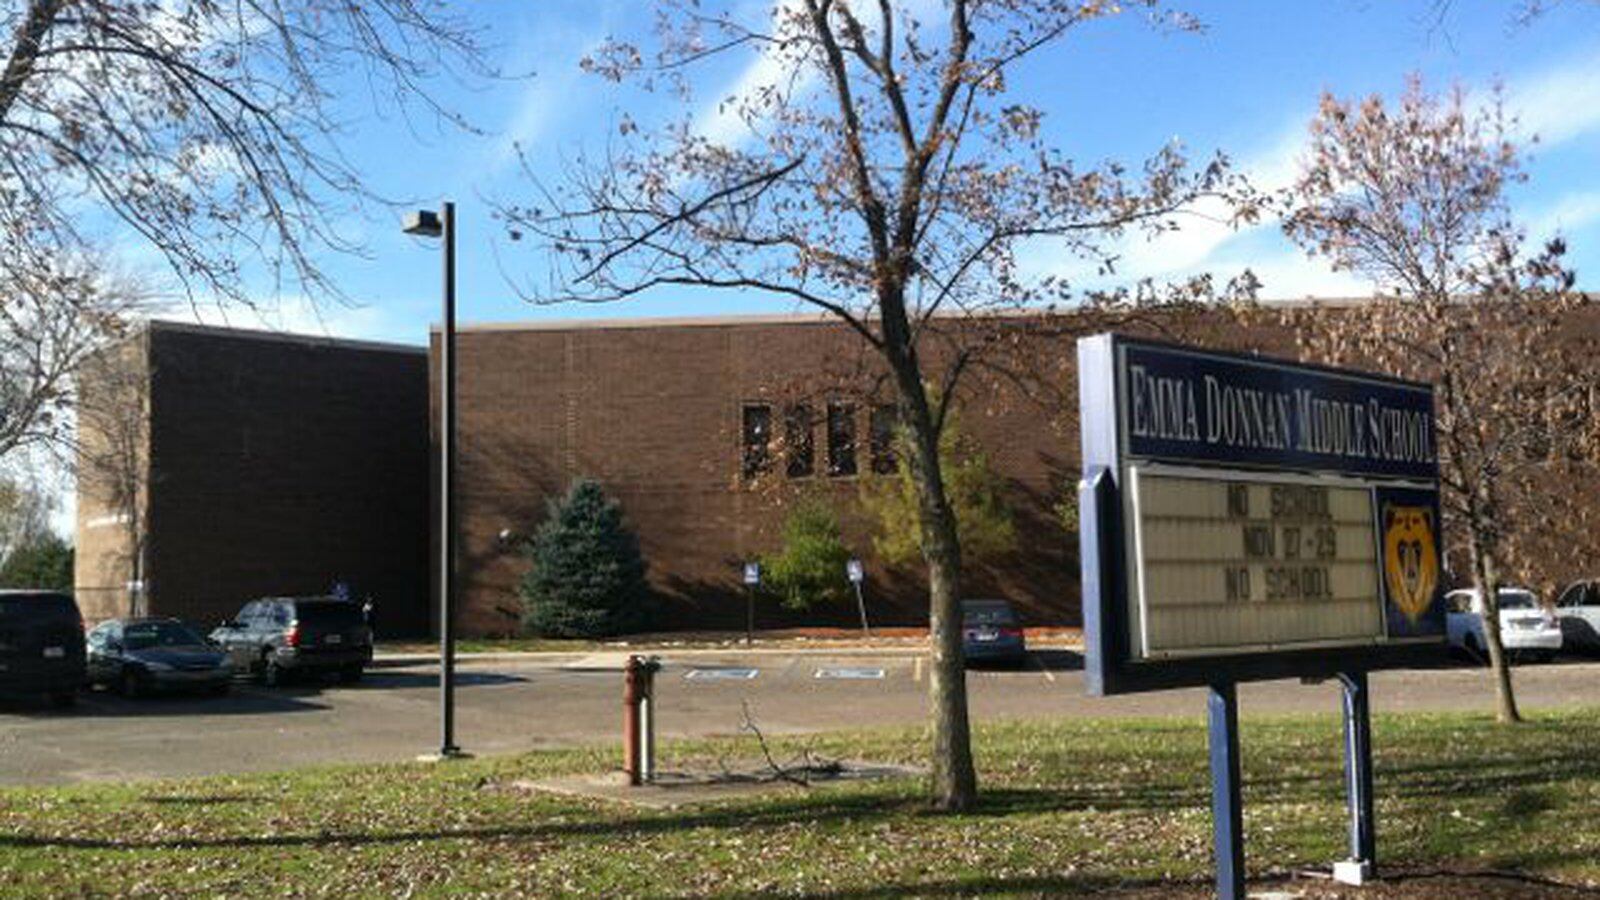 Donnan Middle School was taken over by the state and handed off to be run by Charter Schools USA in 2012. The school now includes an elementary school in partnership with Indianapolis Public Schools.